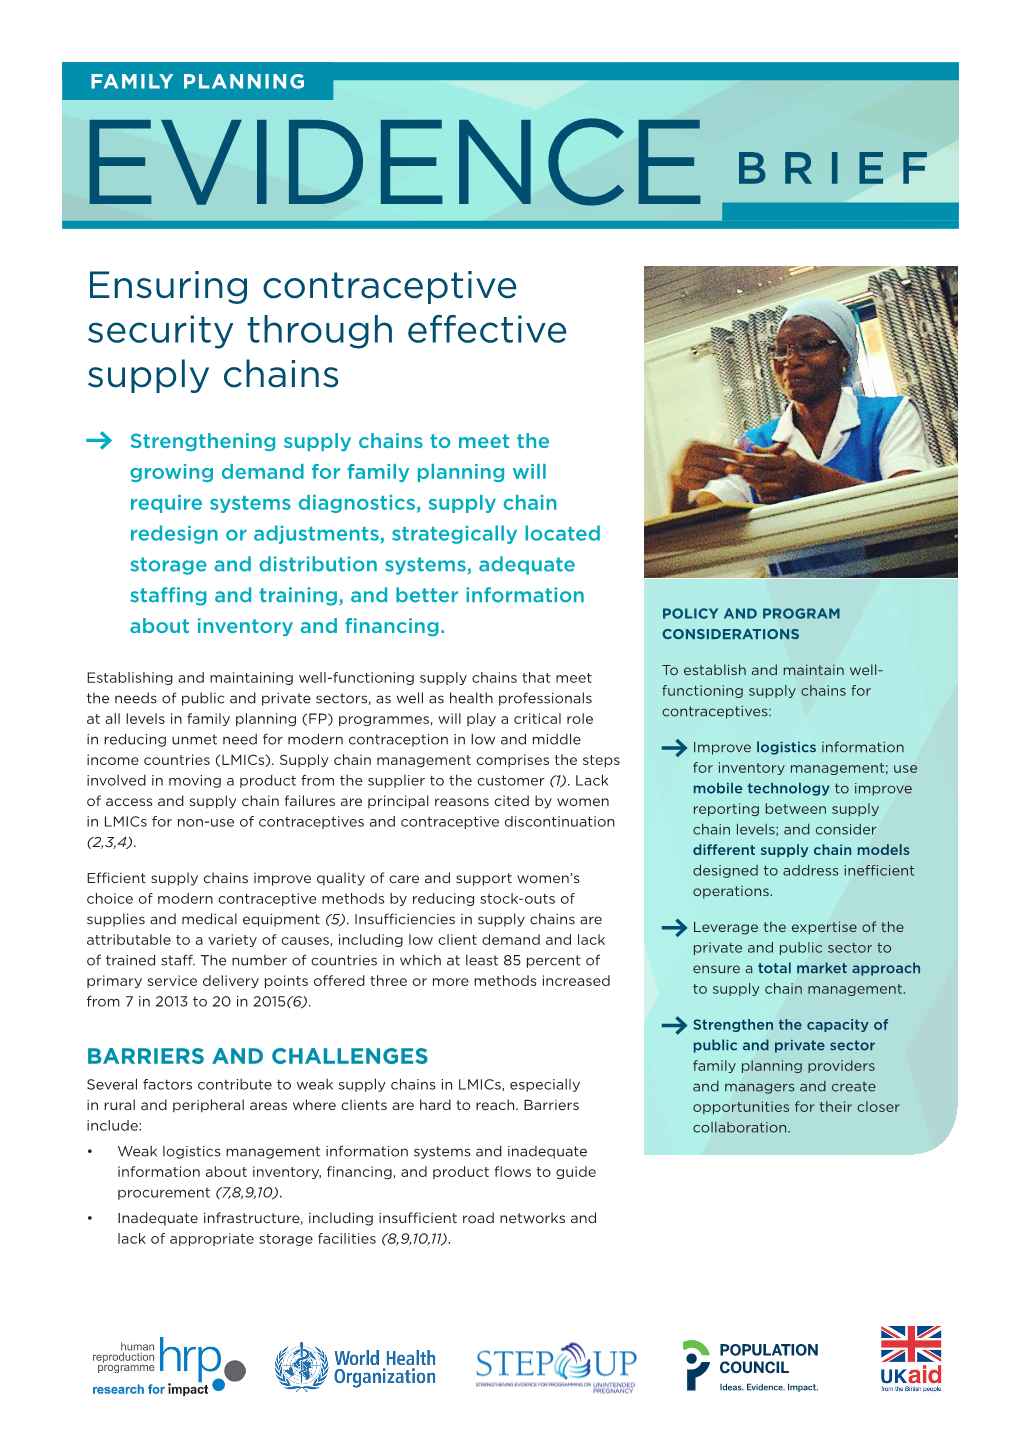 Ensuring Contraceptive Security Through Effective Supply Chains